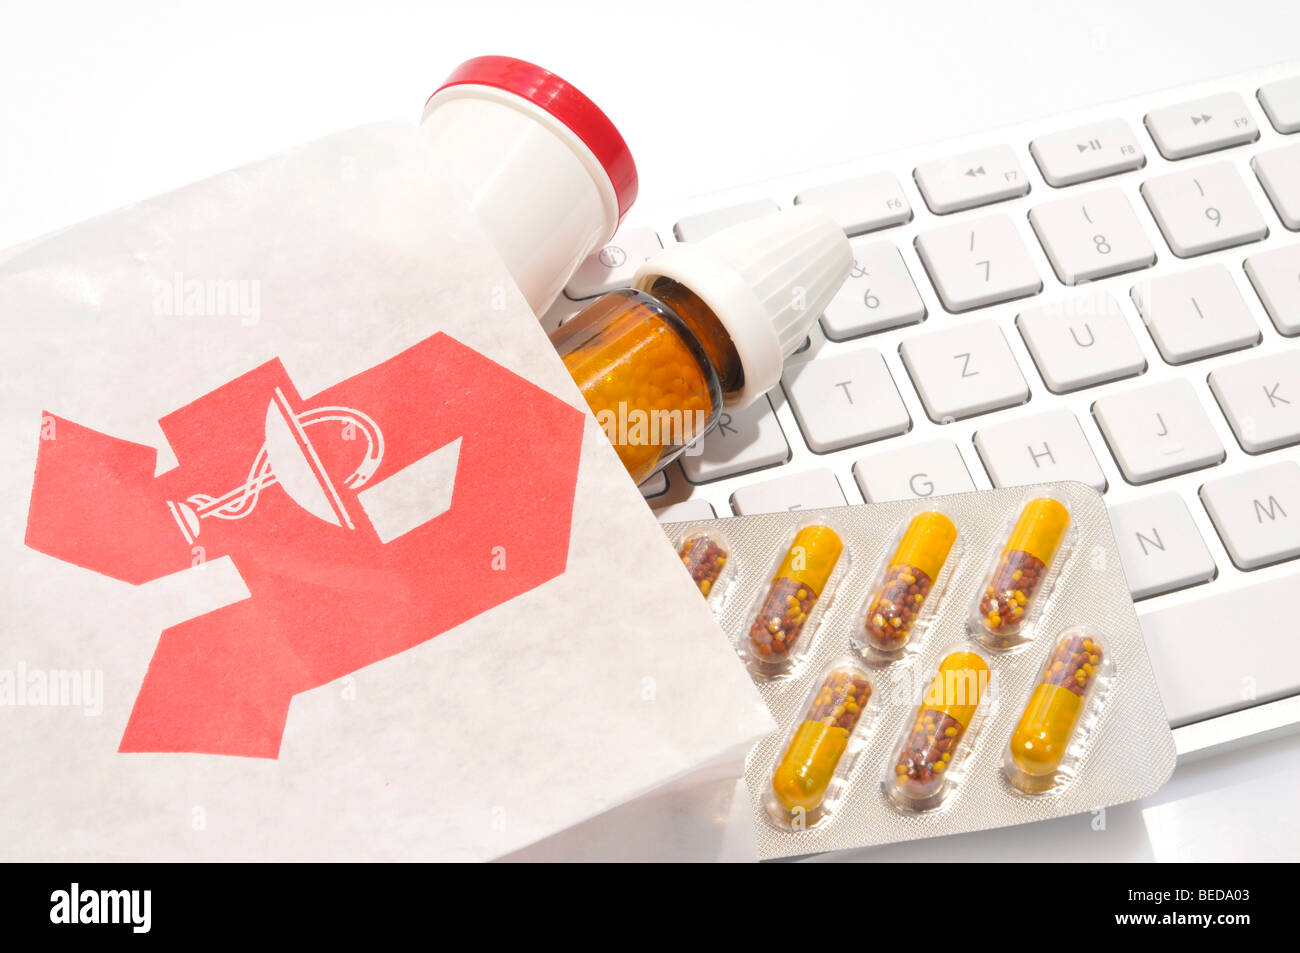 Bag from a German chemist, medicine and a computer keyboard, symbolic image for ordering medicine over the internet Stock Photo